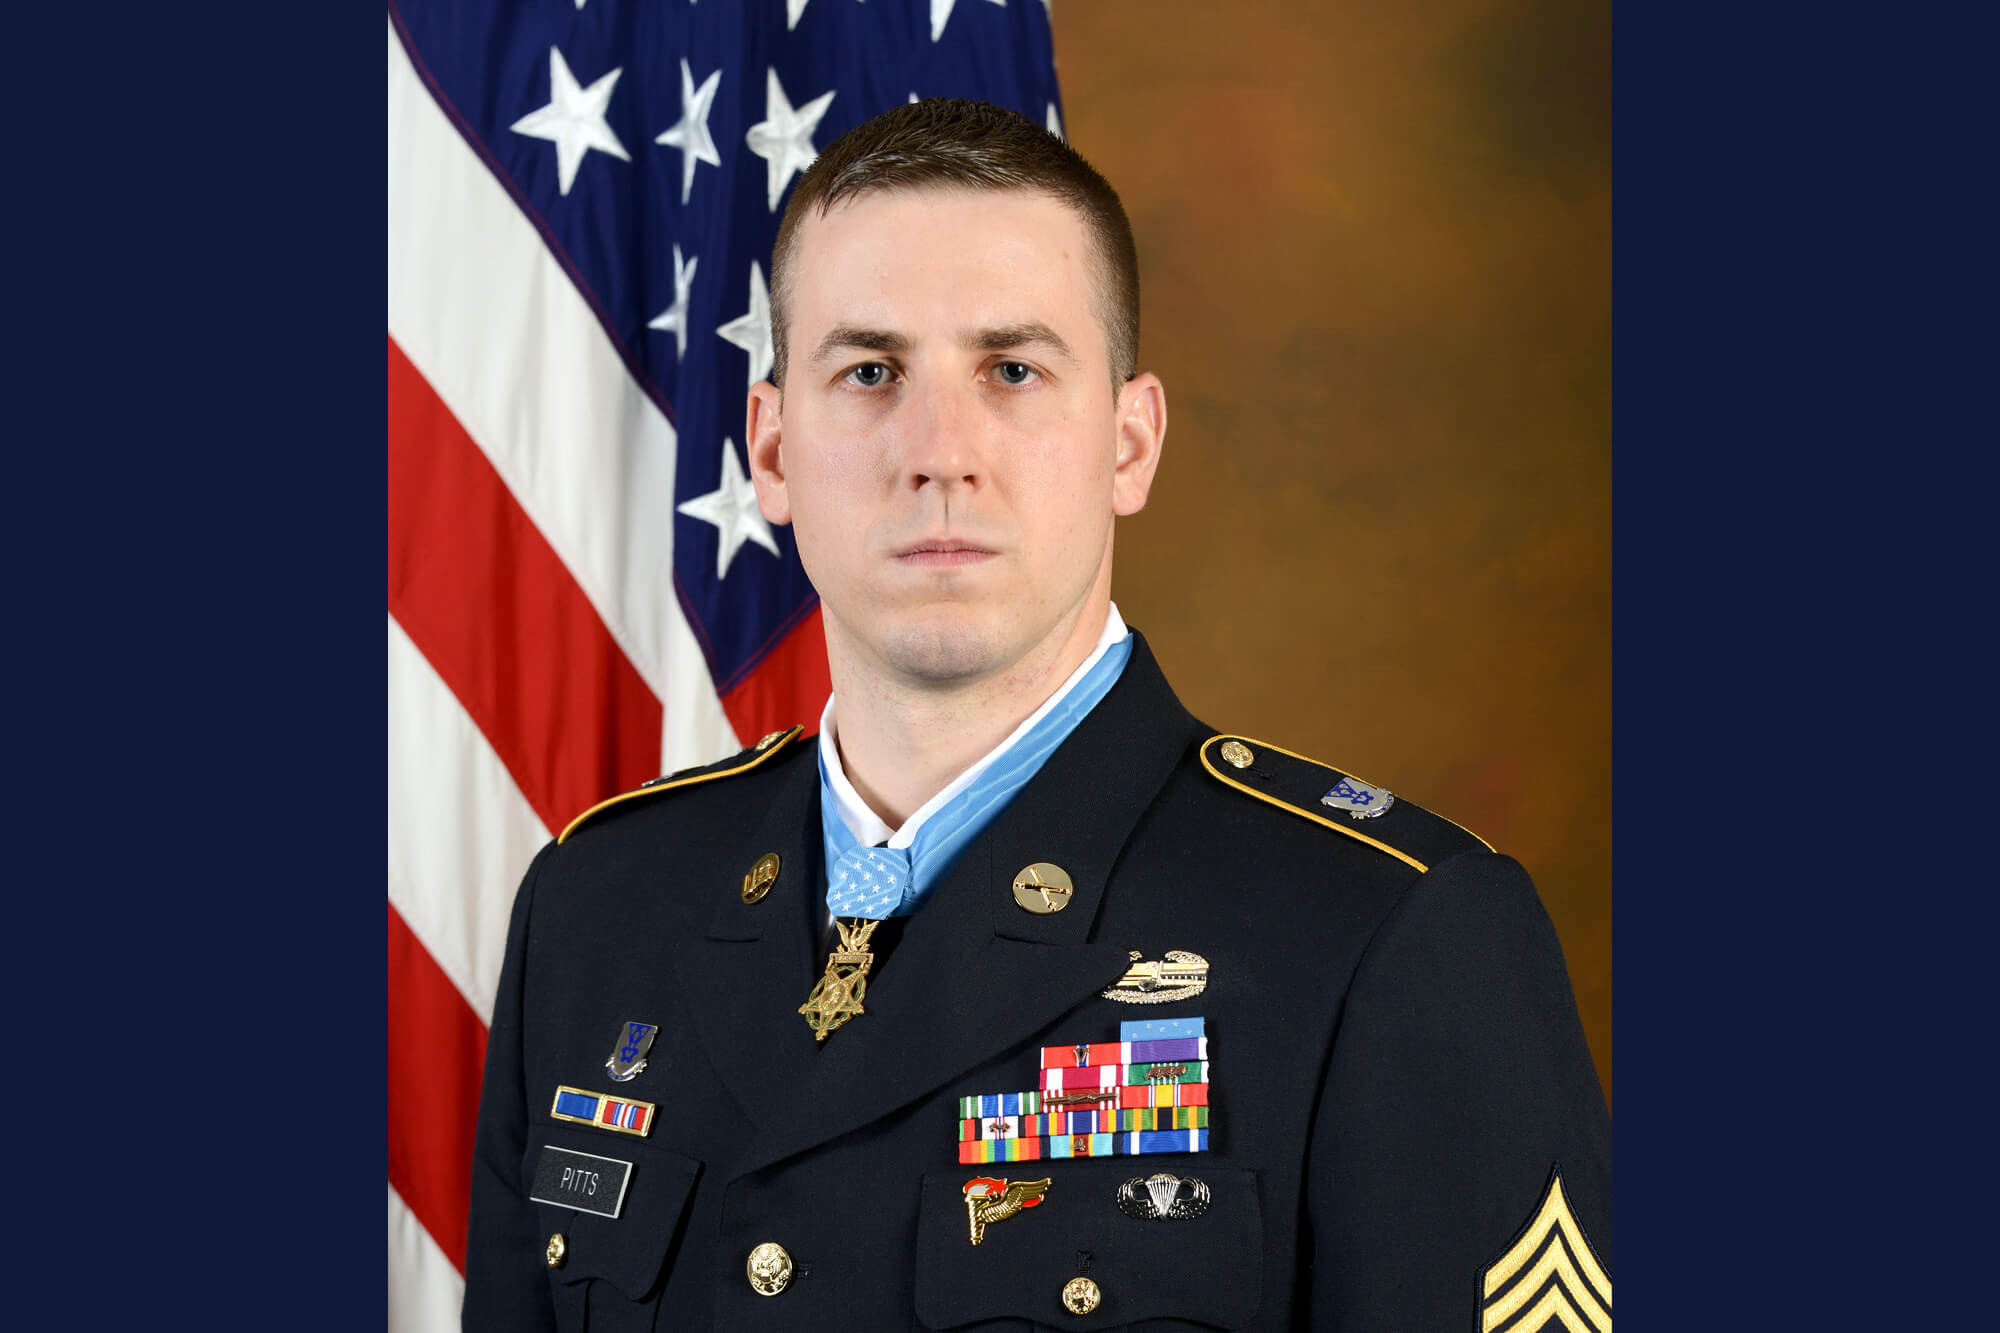 Photo of Medal of Honor recipient Ryan Pitts.